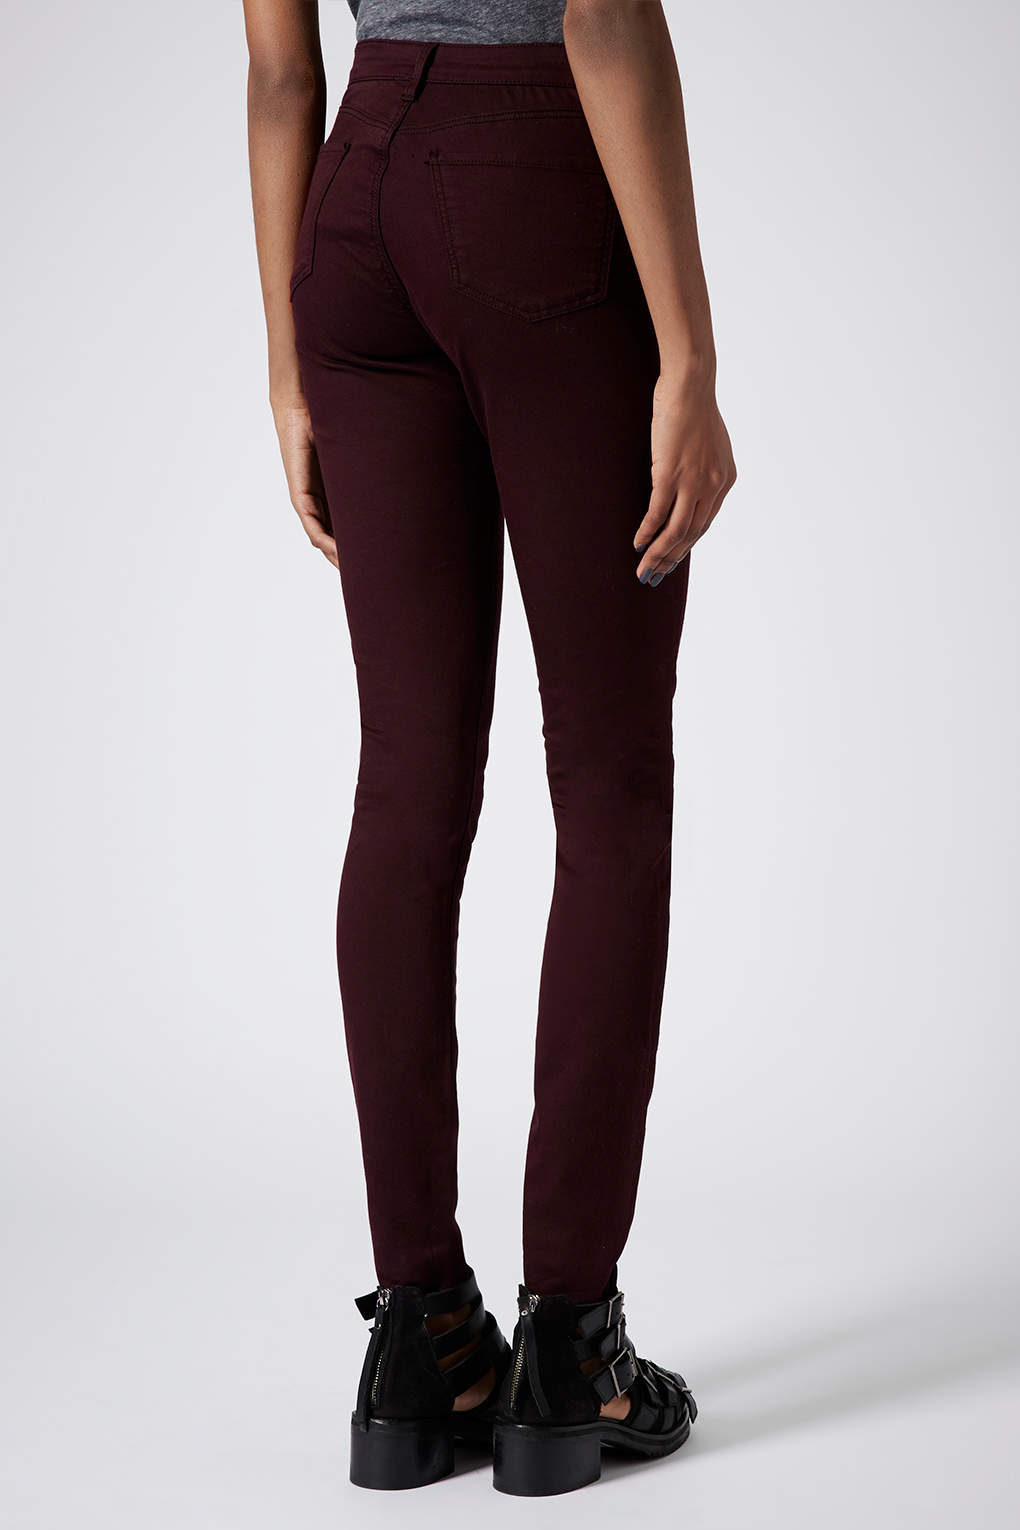 topshop tall leigh jeans